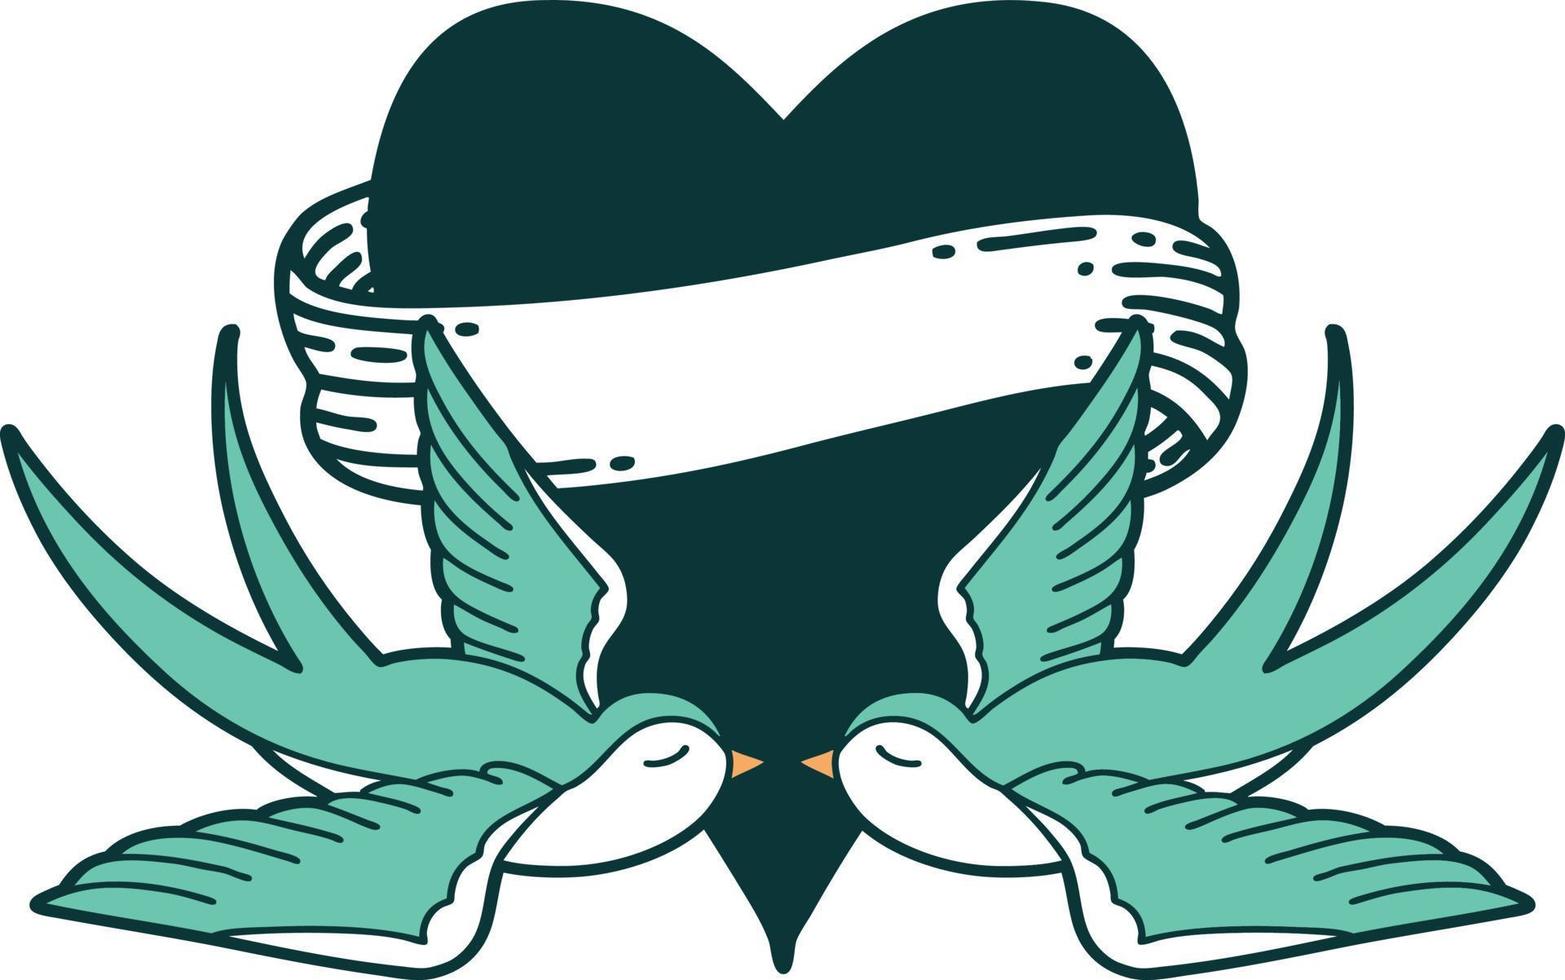 iconic tattoo style image of swallows and a heart with banner vector